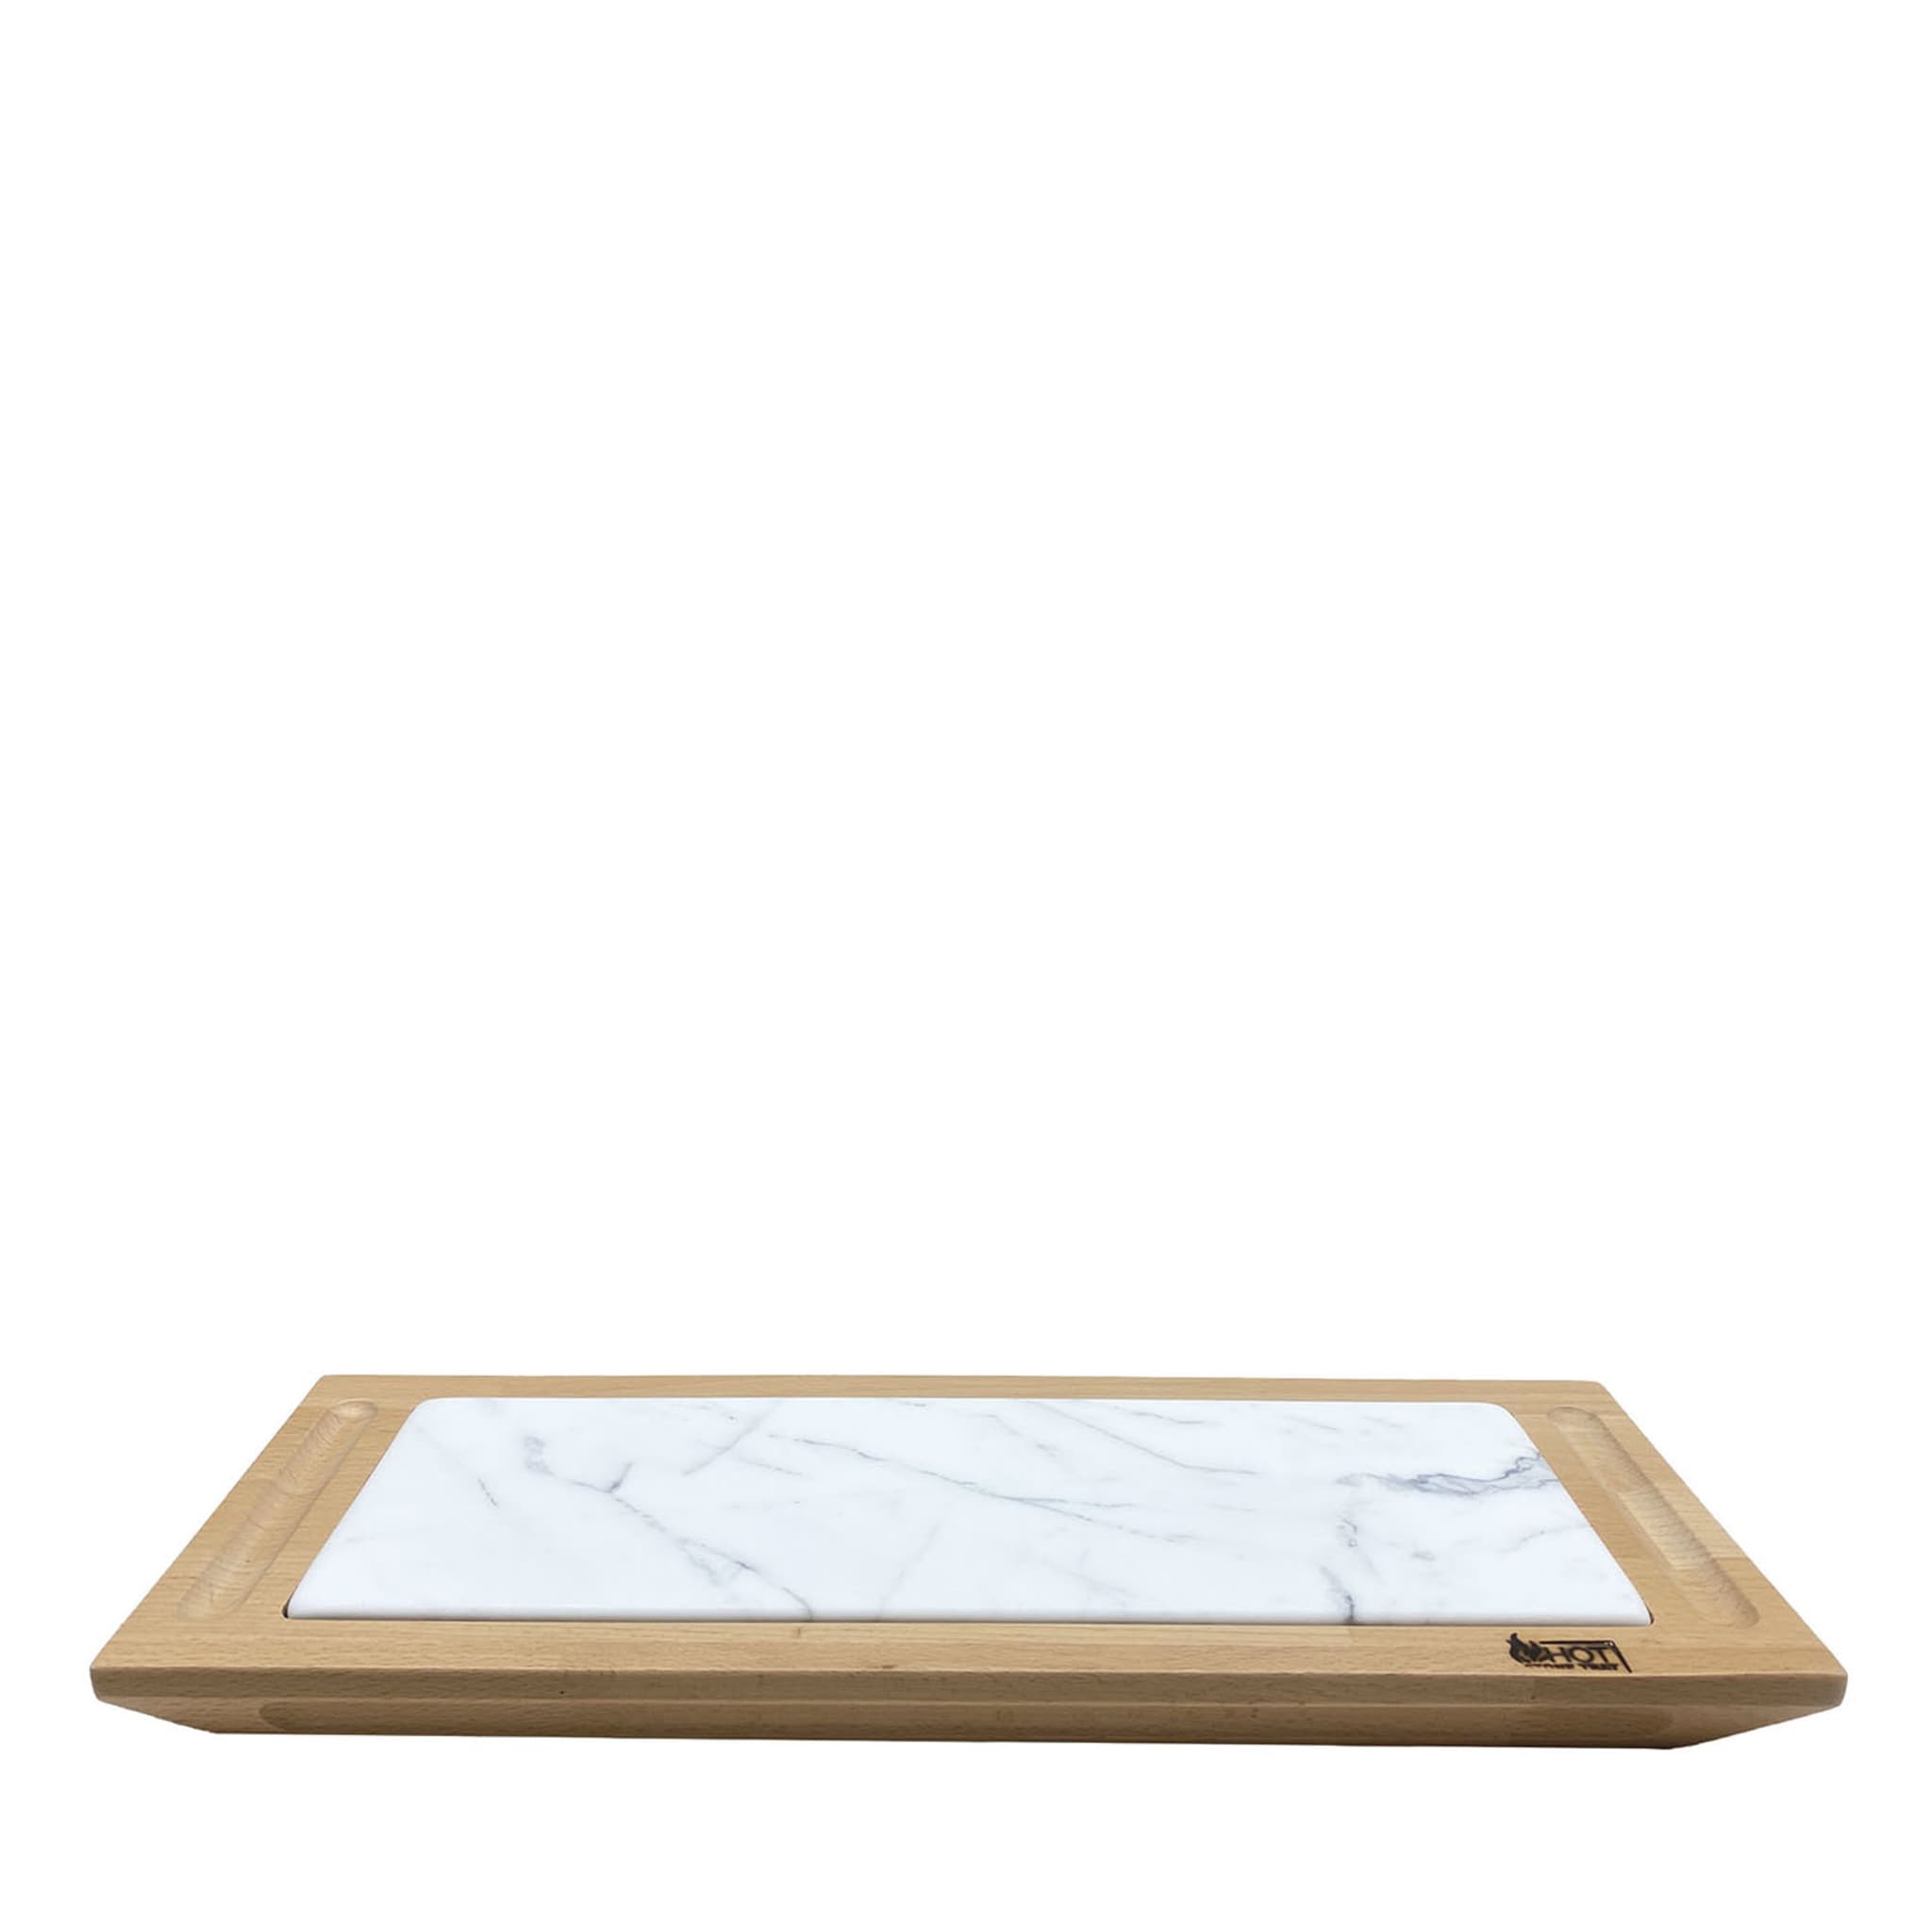 Flat Statuario Tray with Wooden Base - Main view